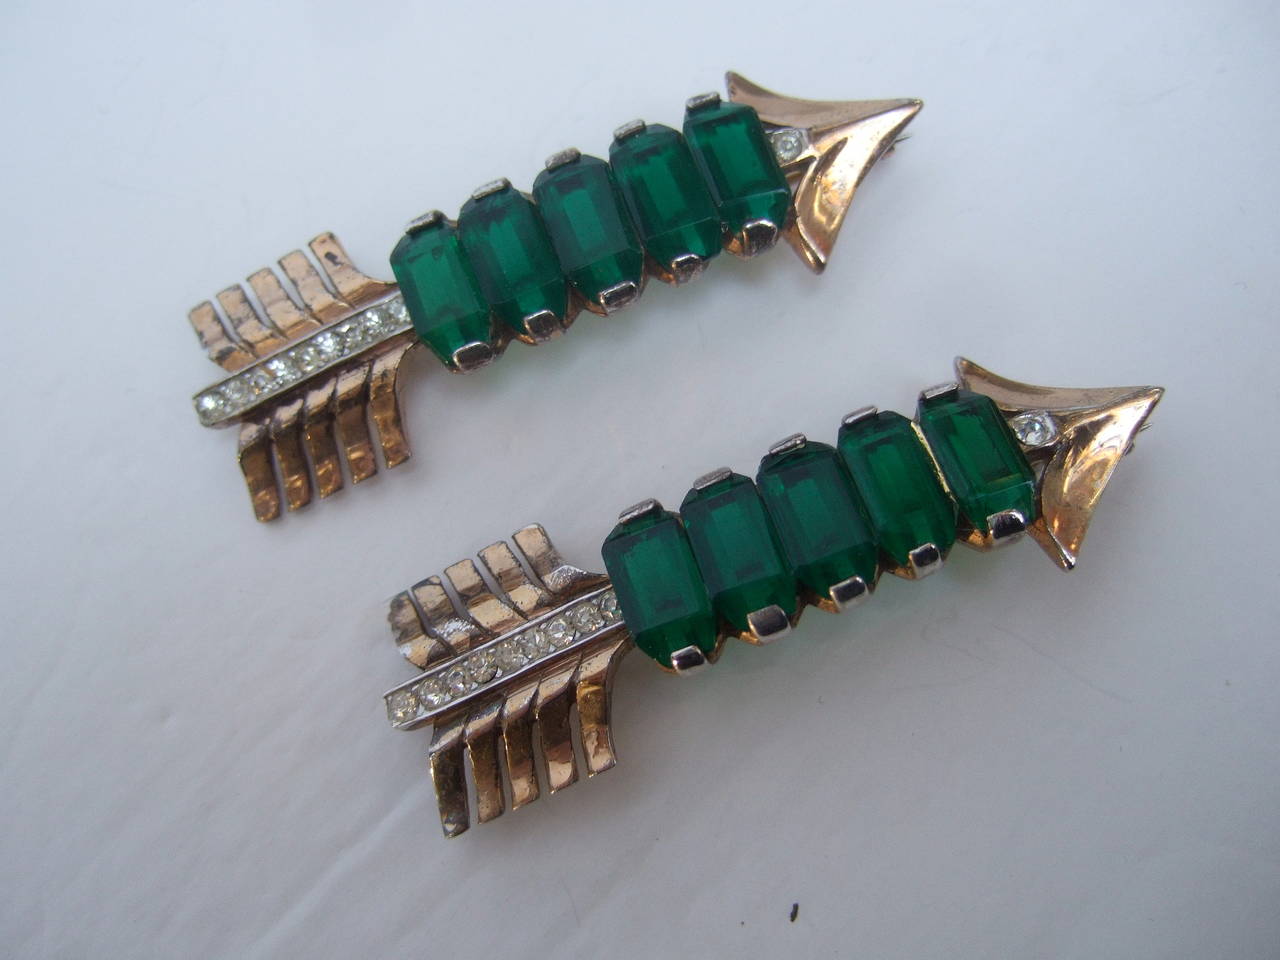 Art Deco Sterling arrow brooches c 1940s
The elegant pair of brooches are designed with a row of emerald green crystals

The brooches are sheathed in gilt vermeil accented with glittering diamante crystal settings

The severe design while